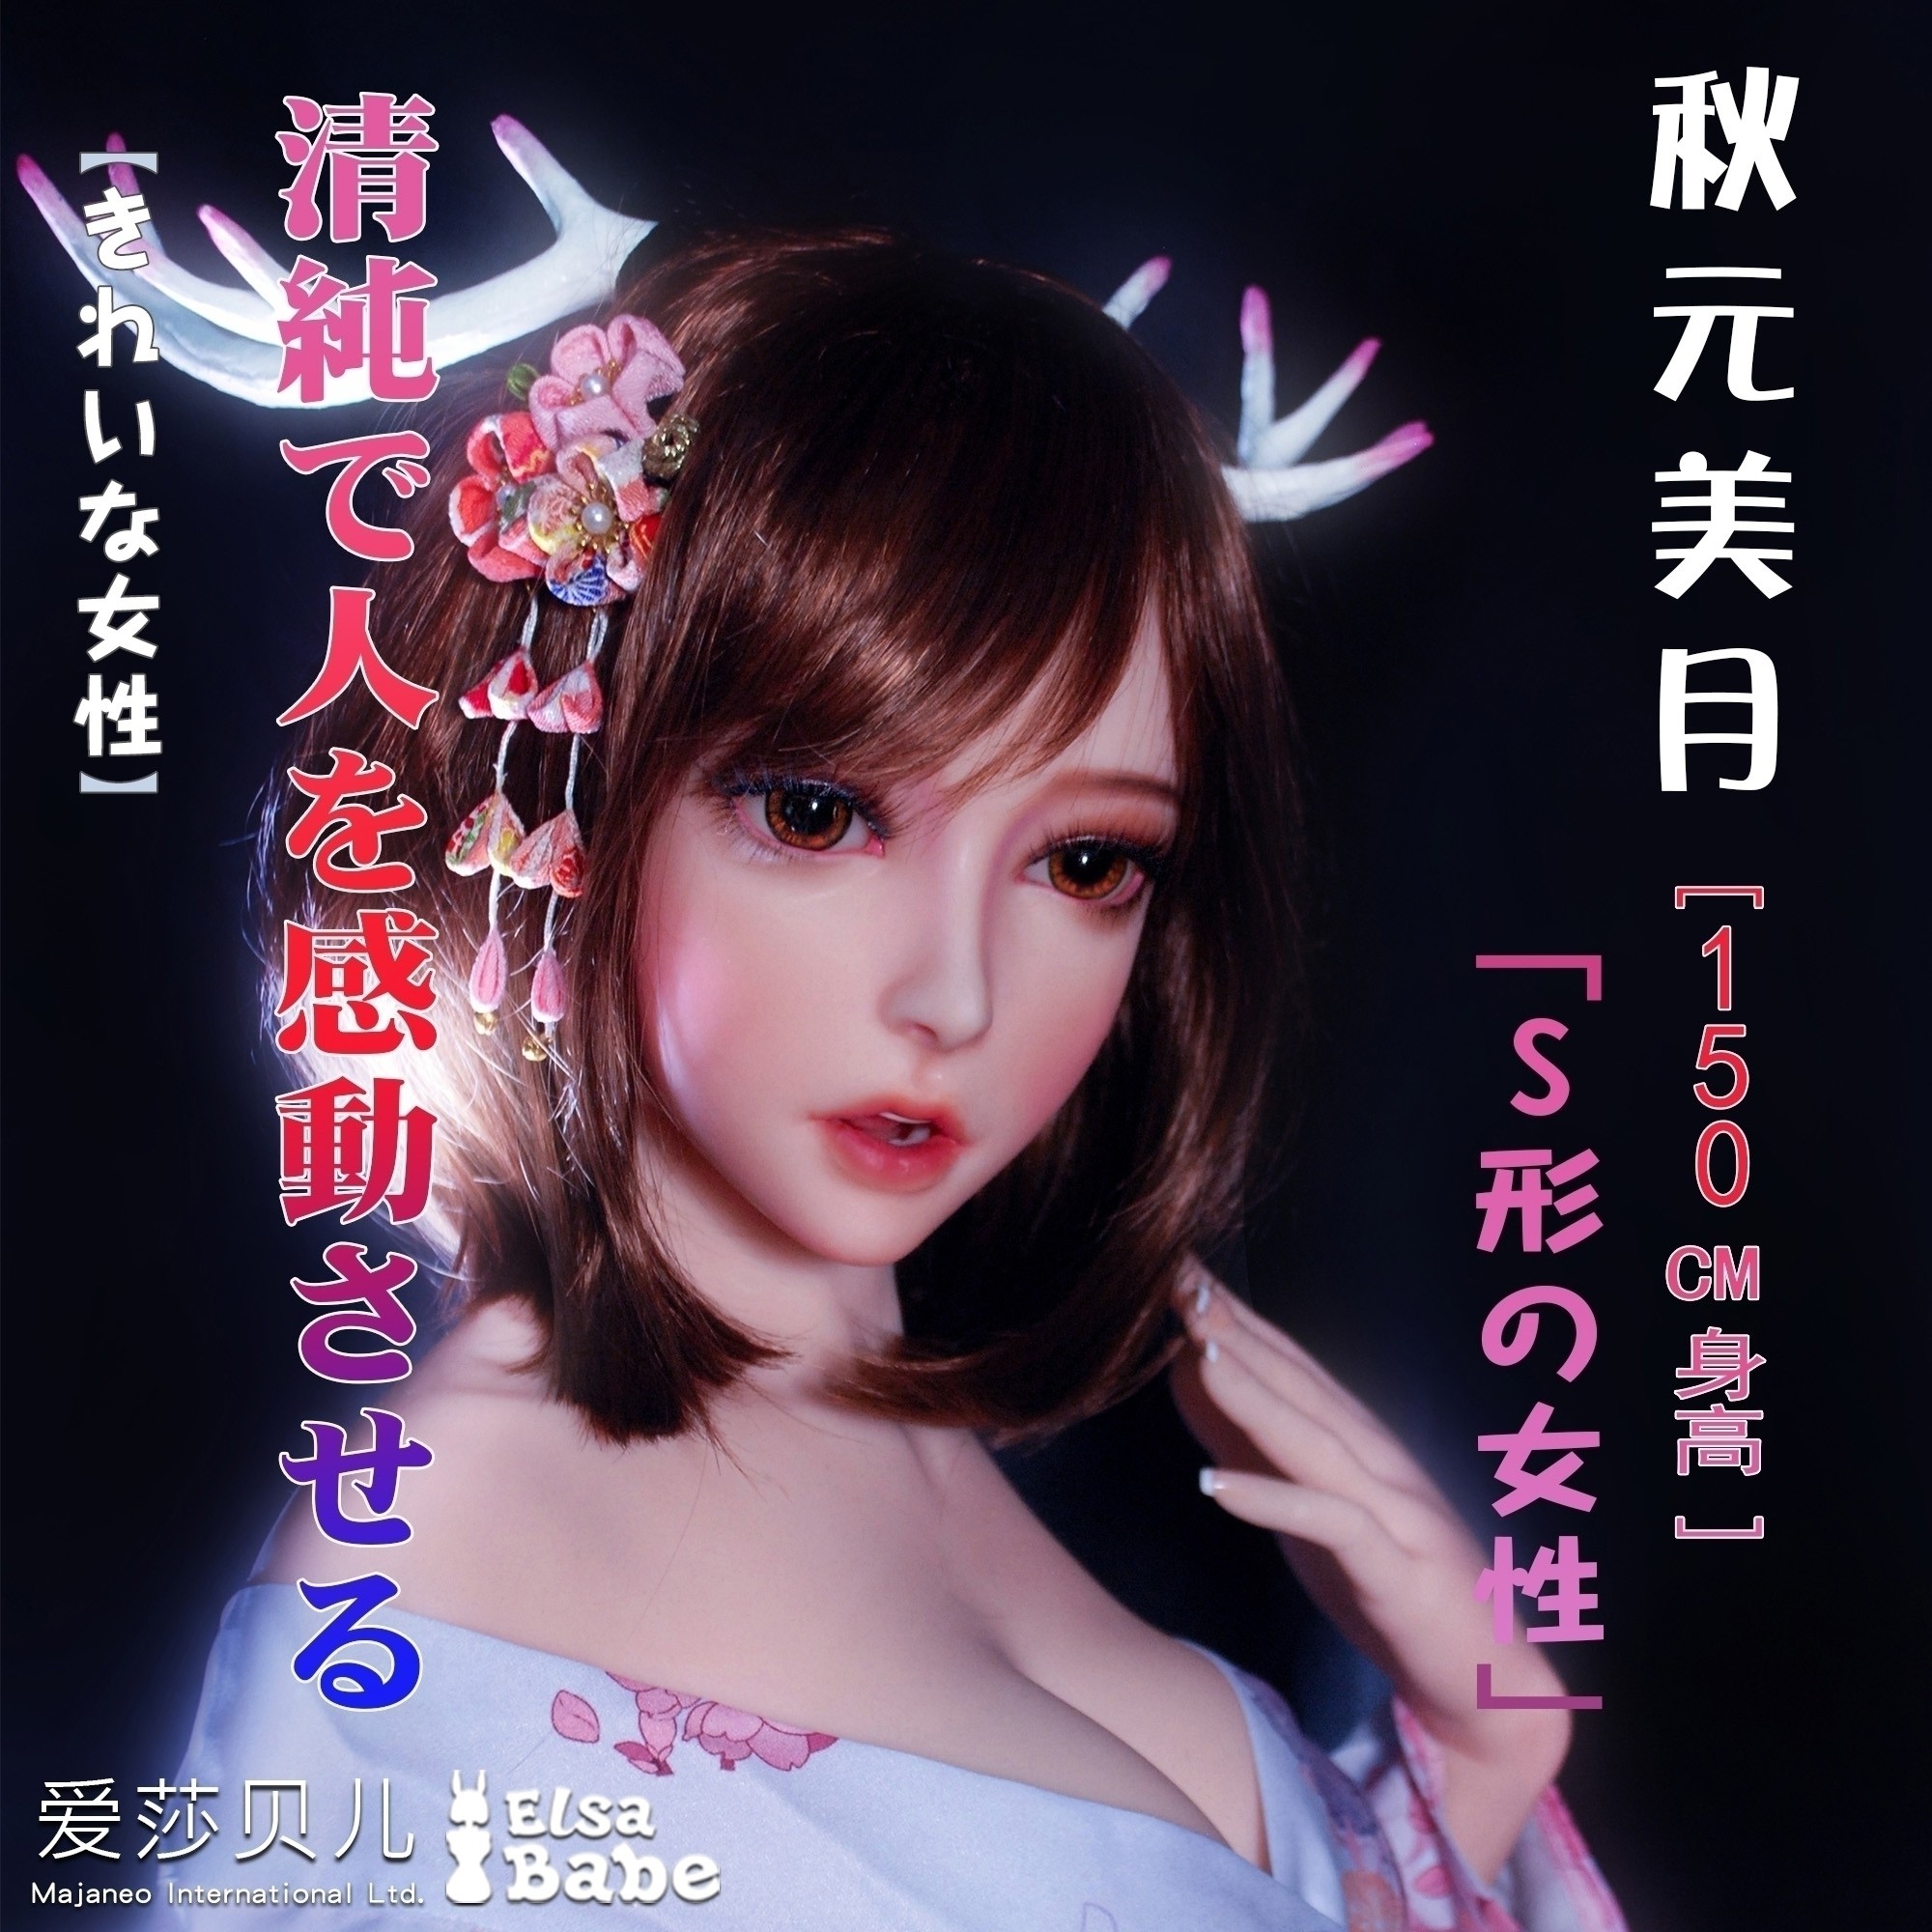 ElsaBabe 125cm 148cm 150cm Big Breasts Platinum Silicone Sex Doll Anime Figure Body Real Solid Erotic Toy with Metal Skeleton, Akimoto Mitsuki